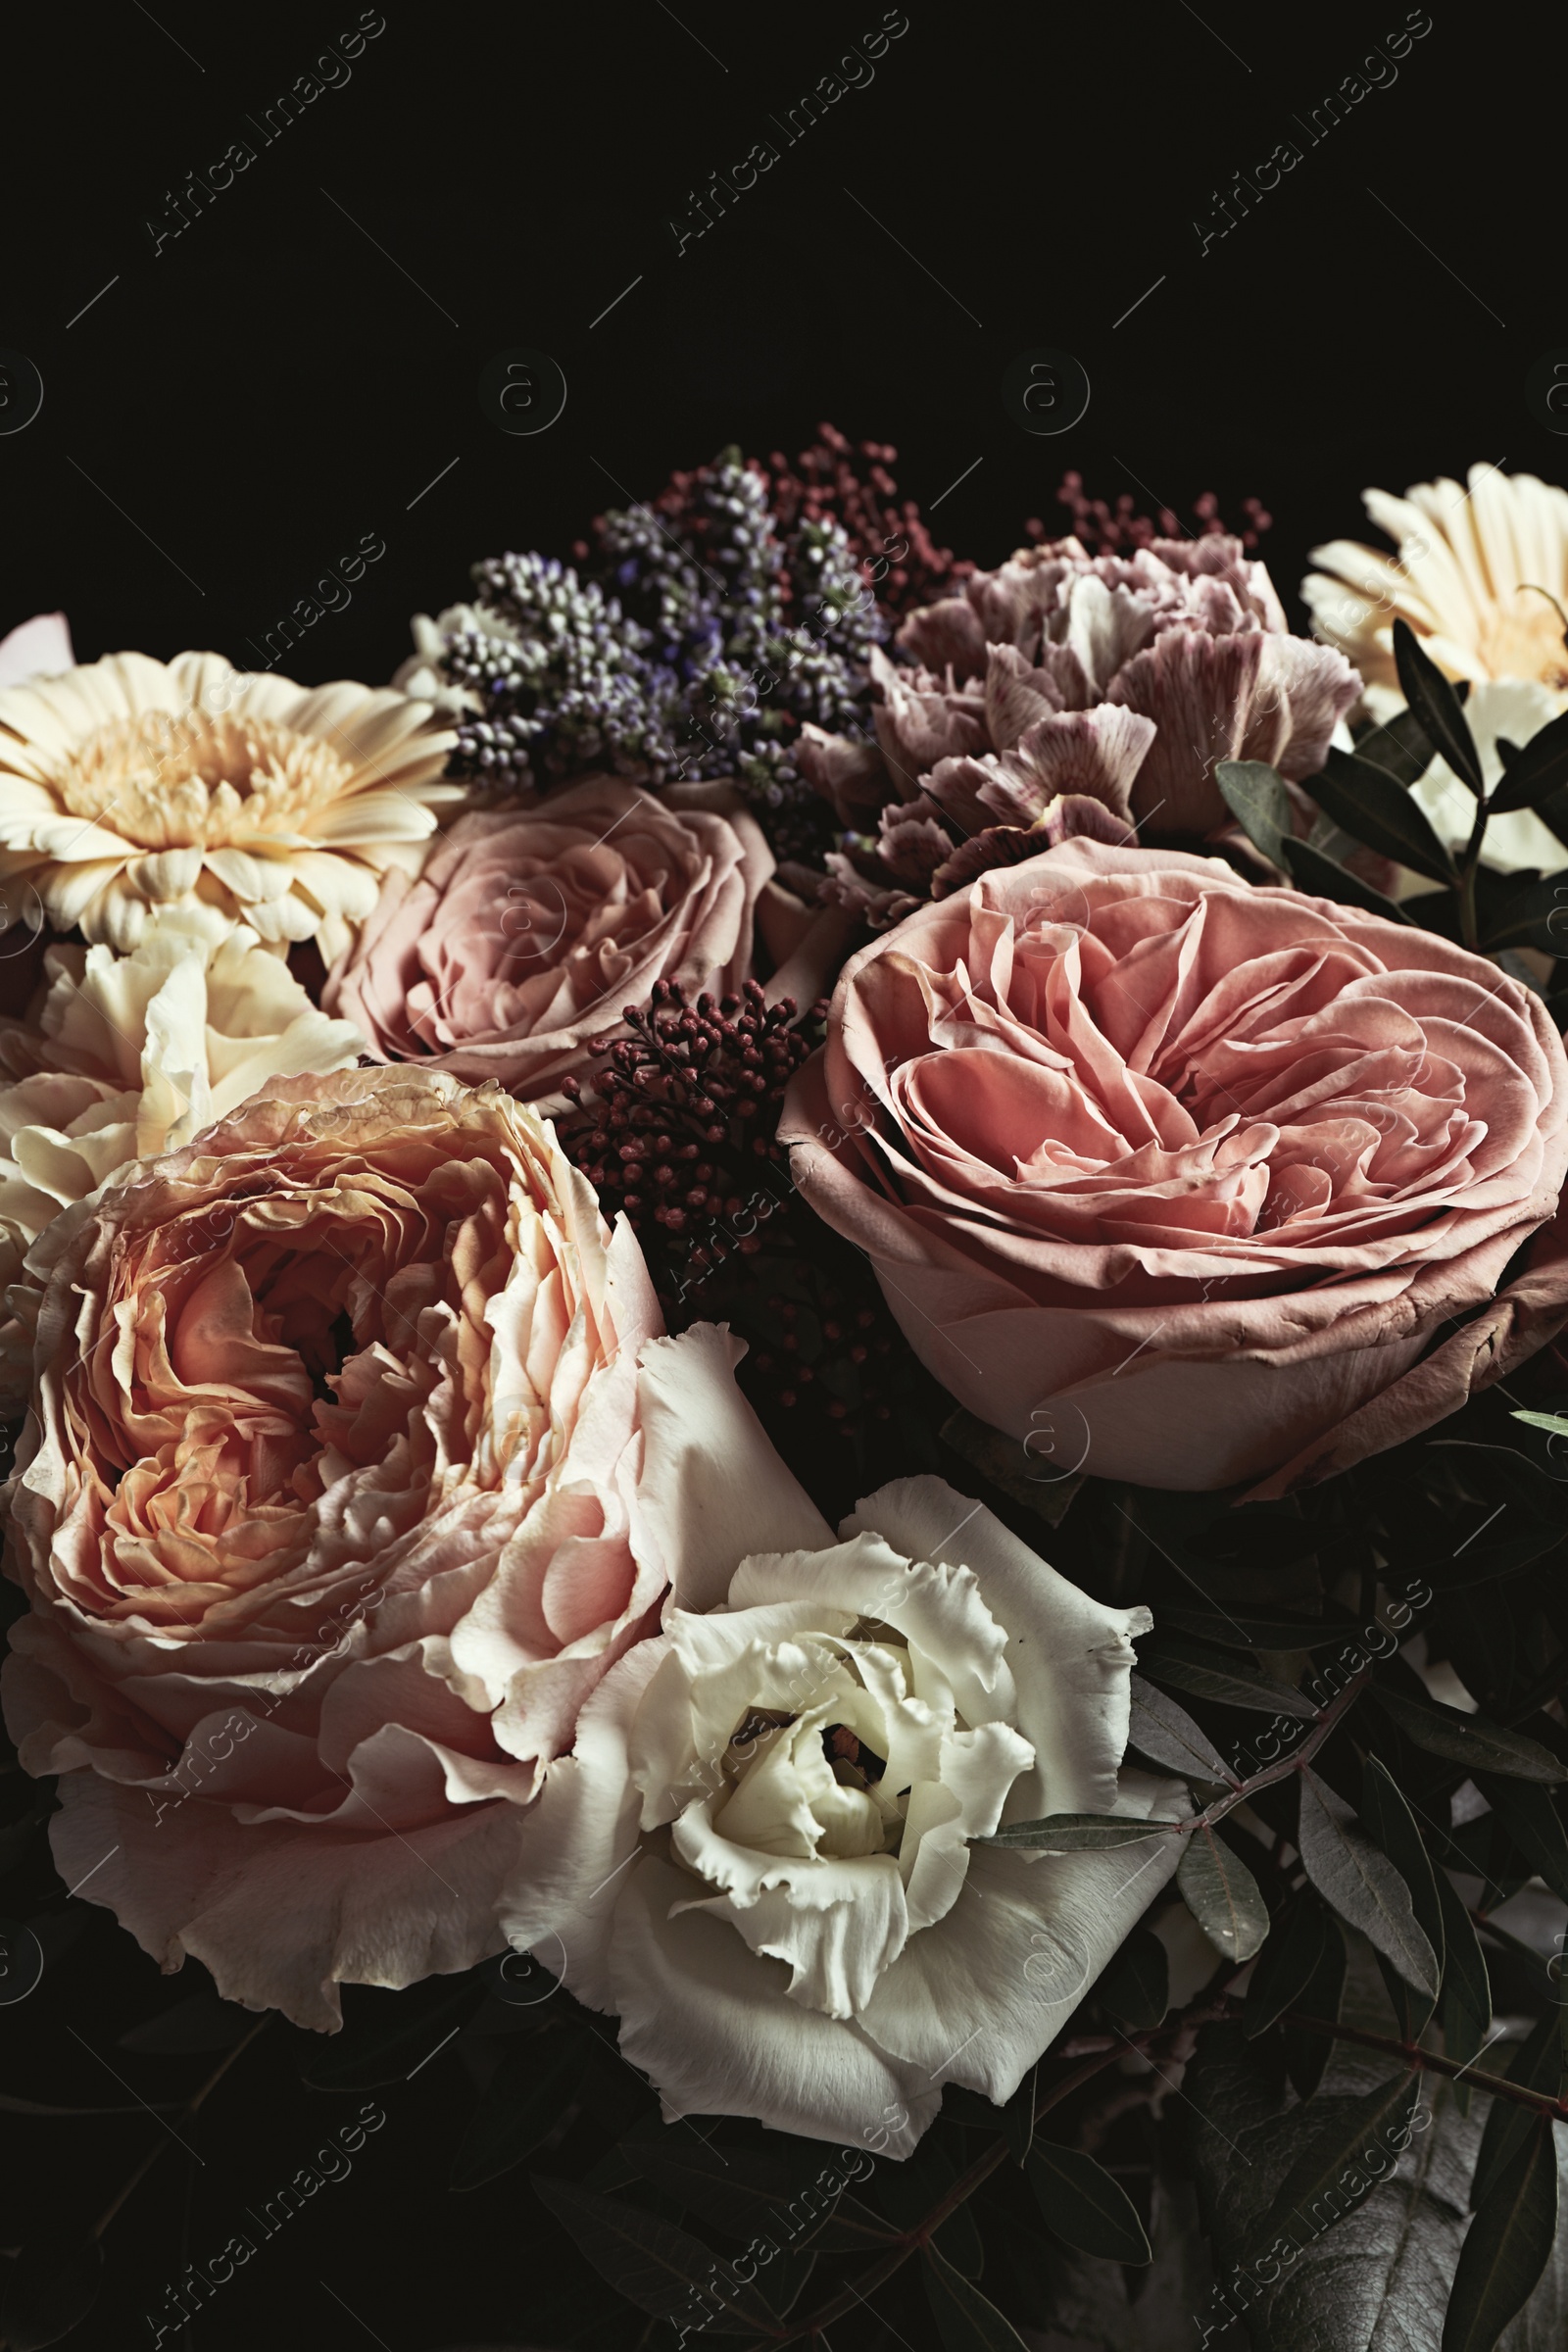 Photo of Beautiful bouquet on black background. Floral card design with dark vintage effect